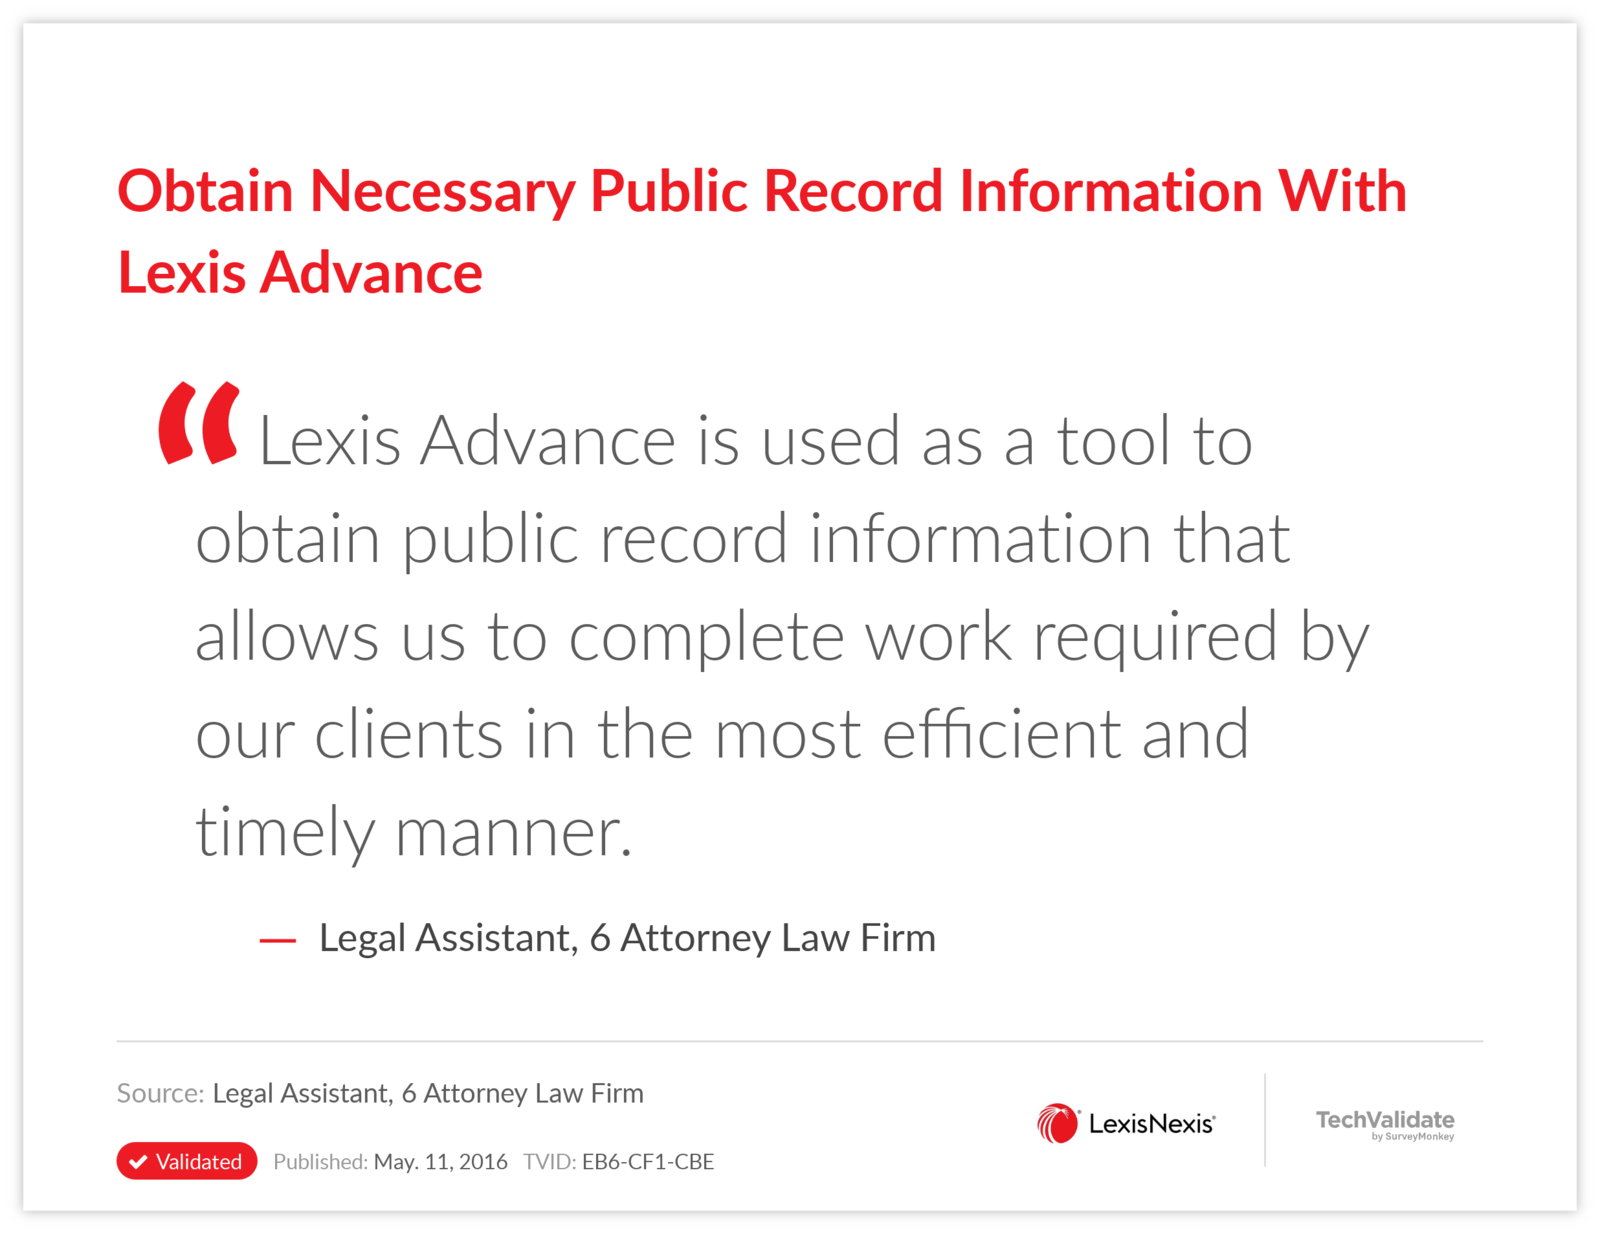 Obtain Necessary Public Record Information With Lexis Advance